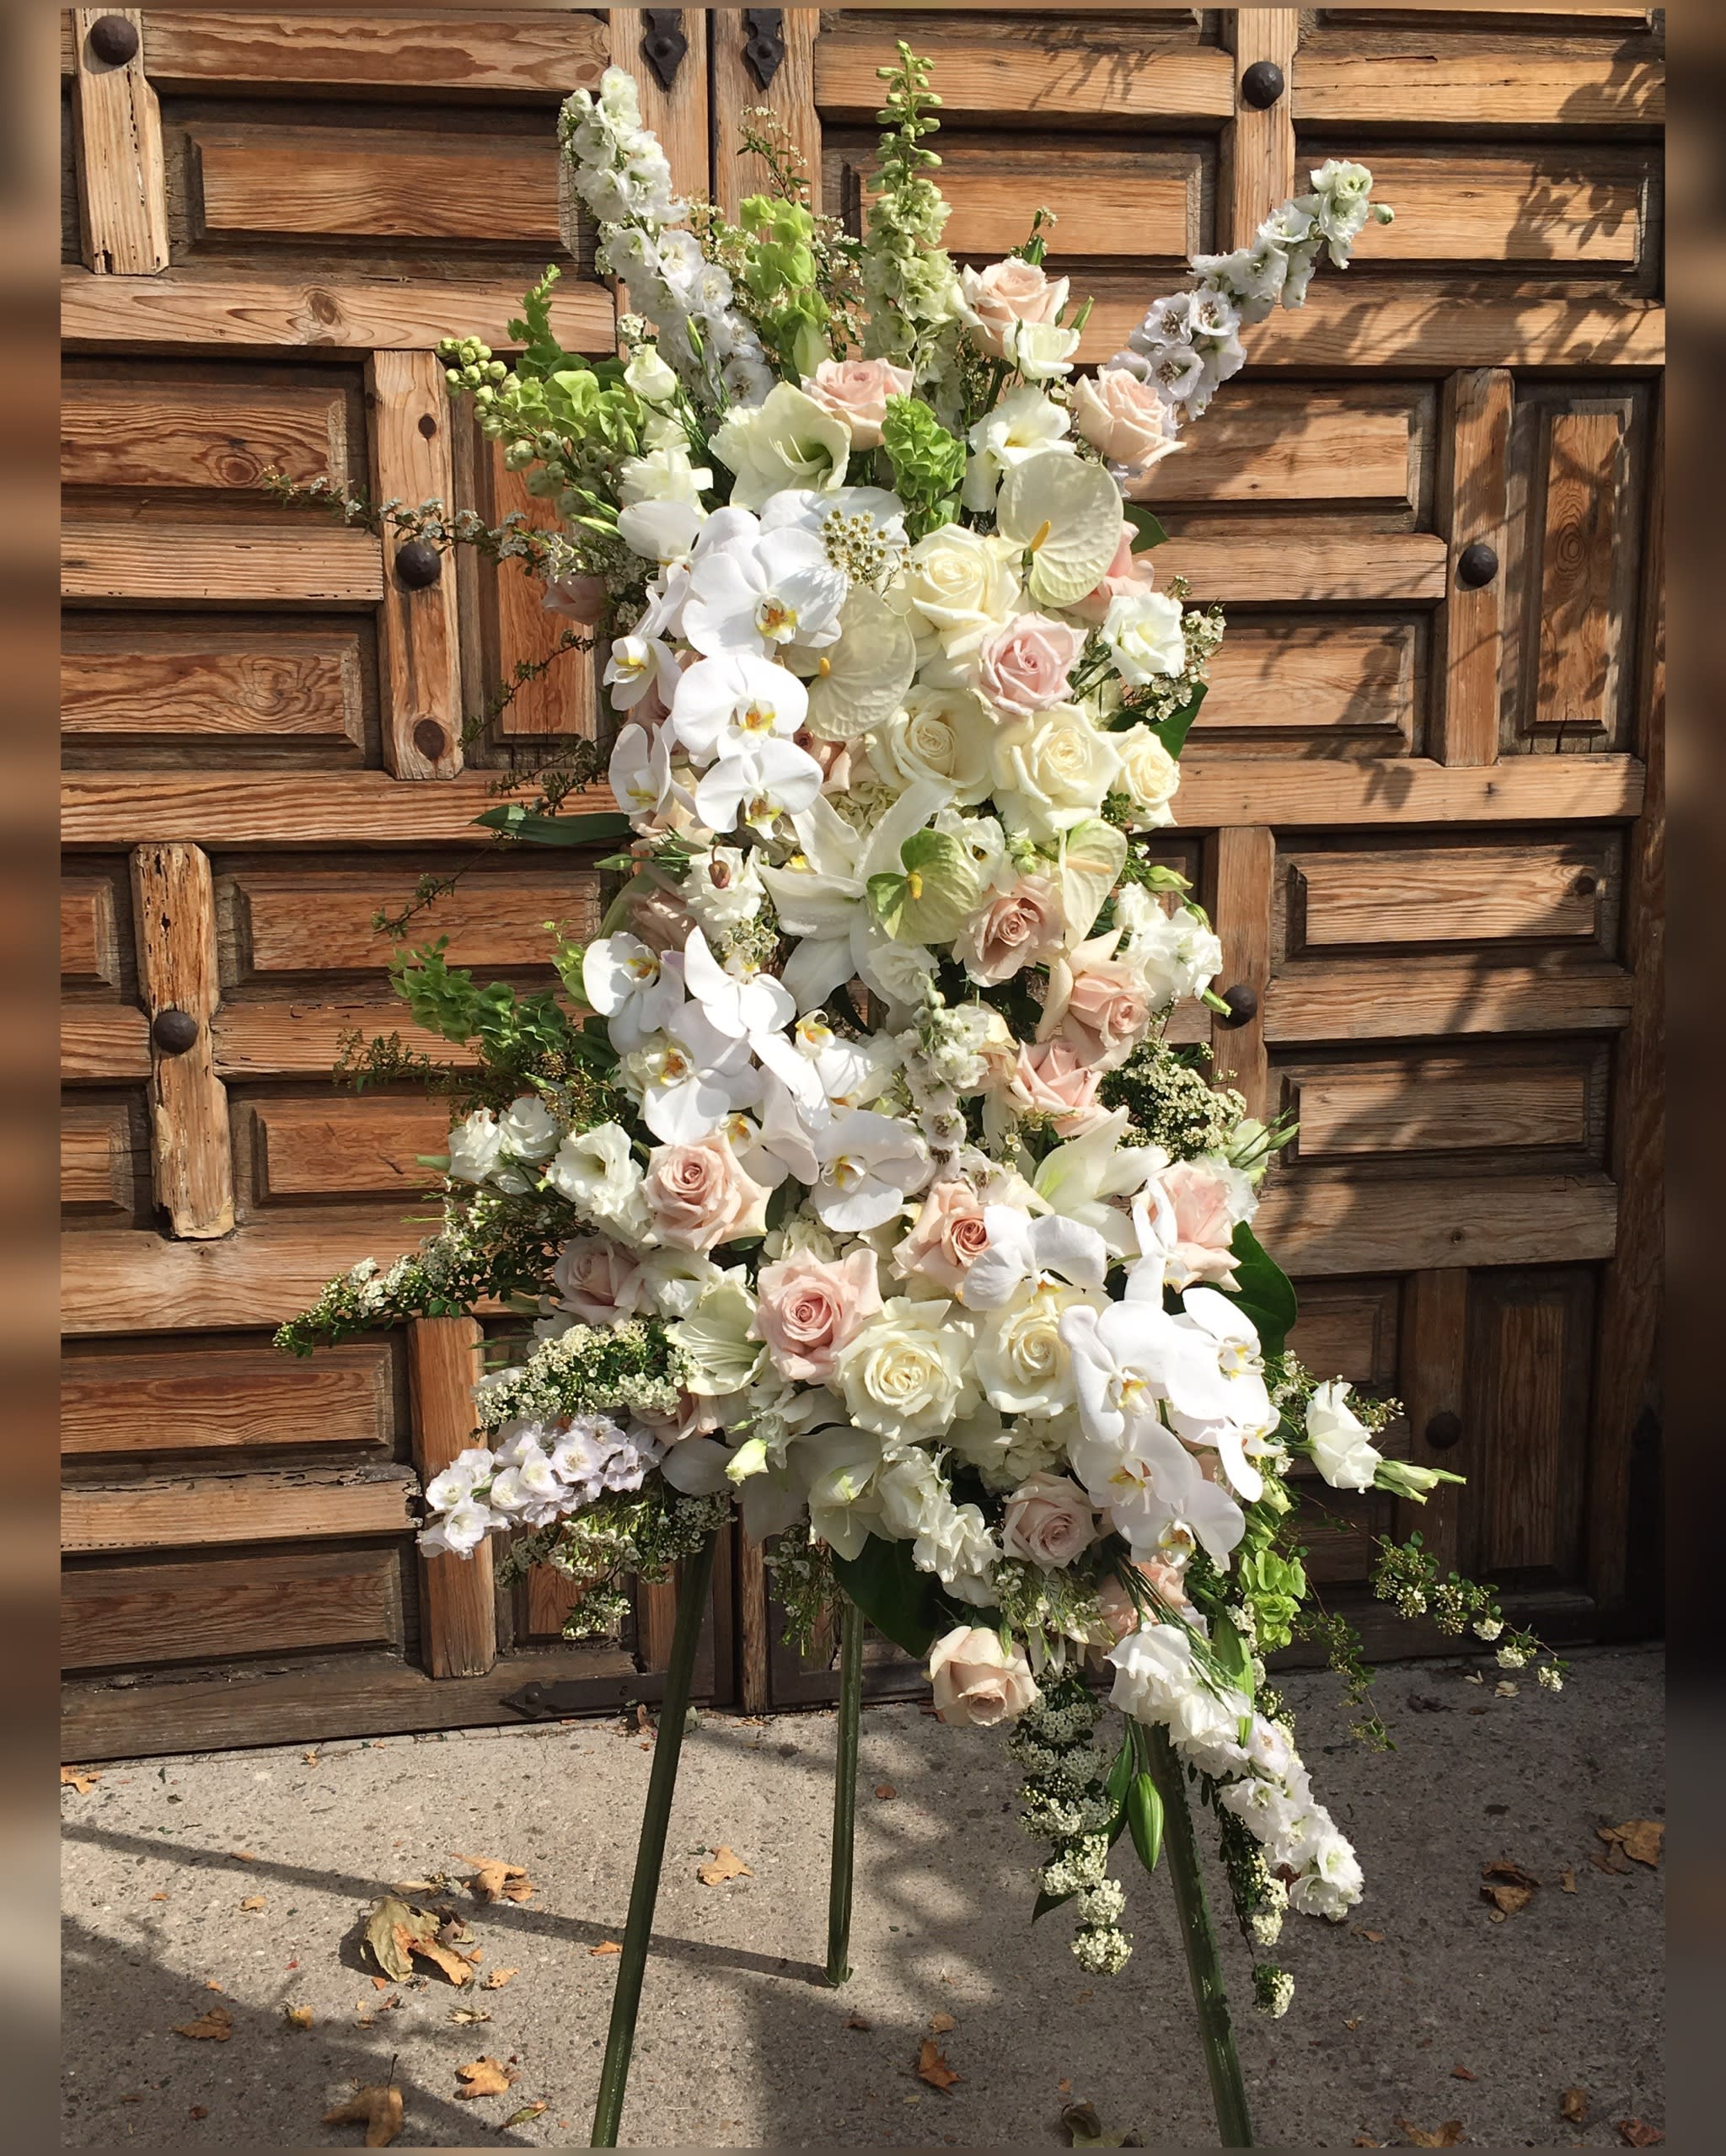 Gentle Solace  - Big beautiful funeral spray in soft pinks, creams and white that will definitely make an elegant statement. 